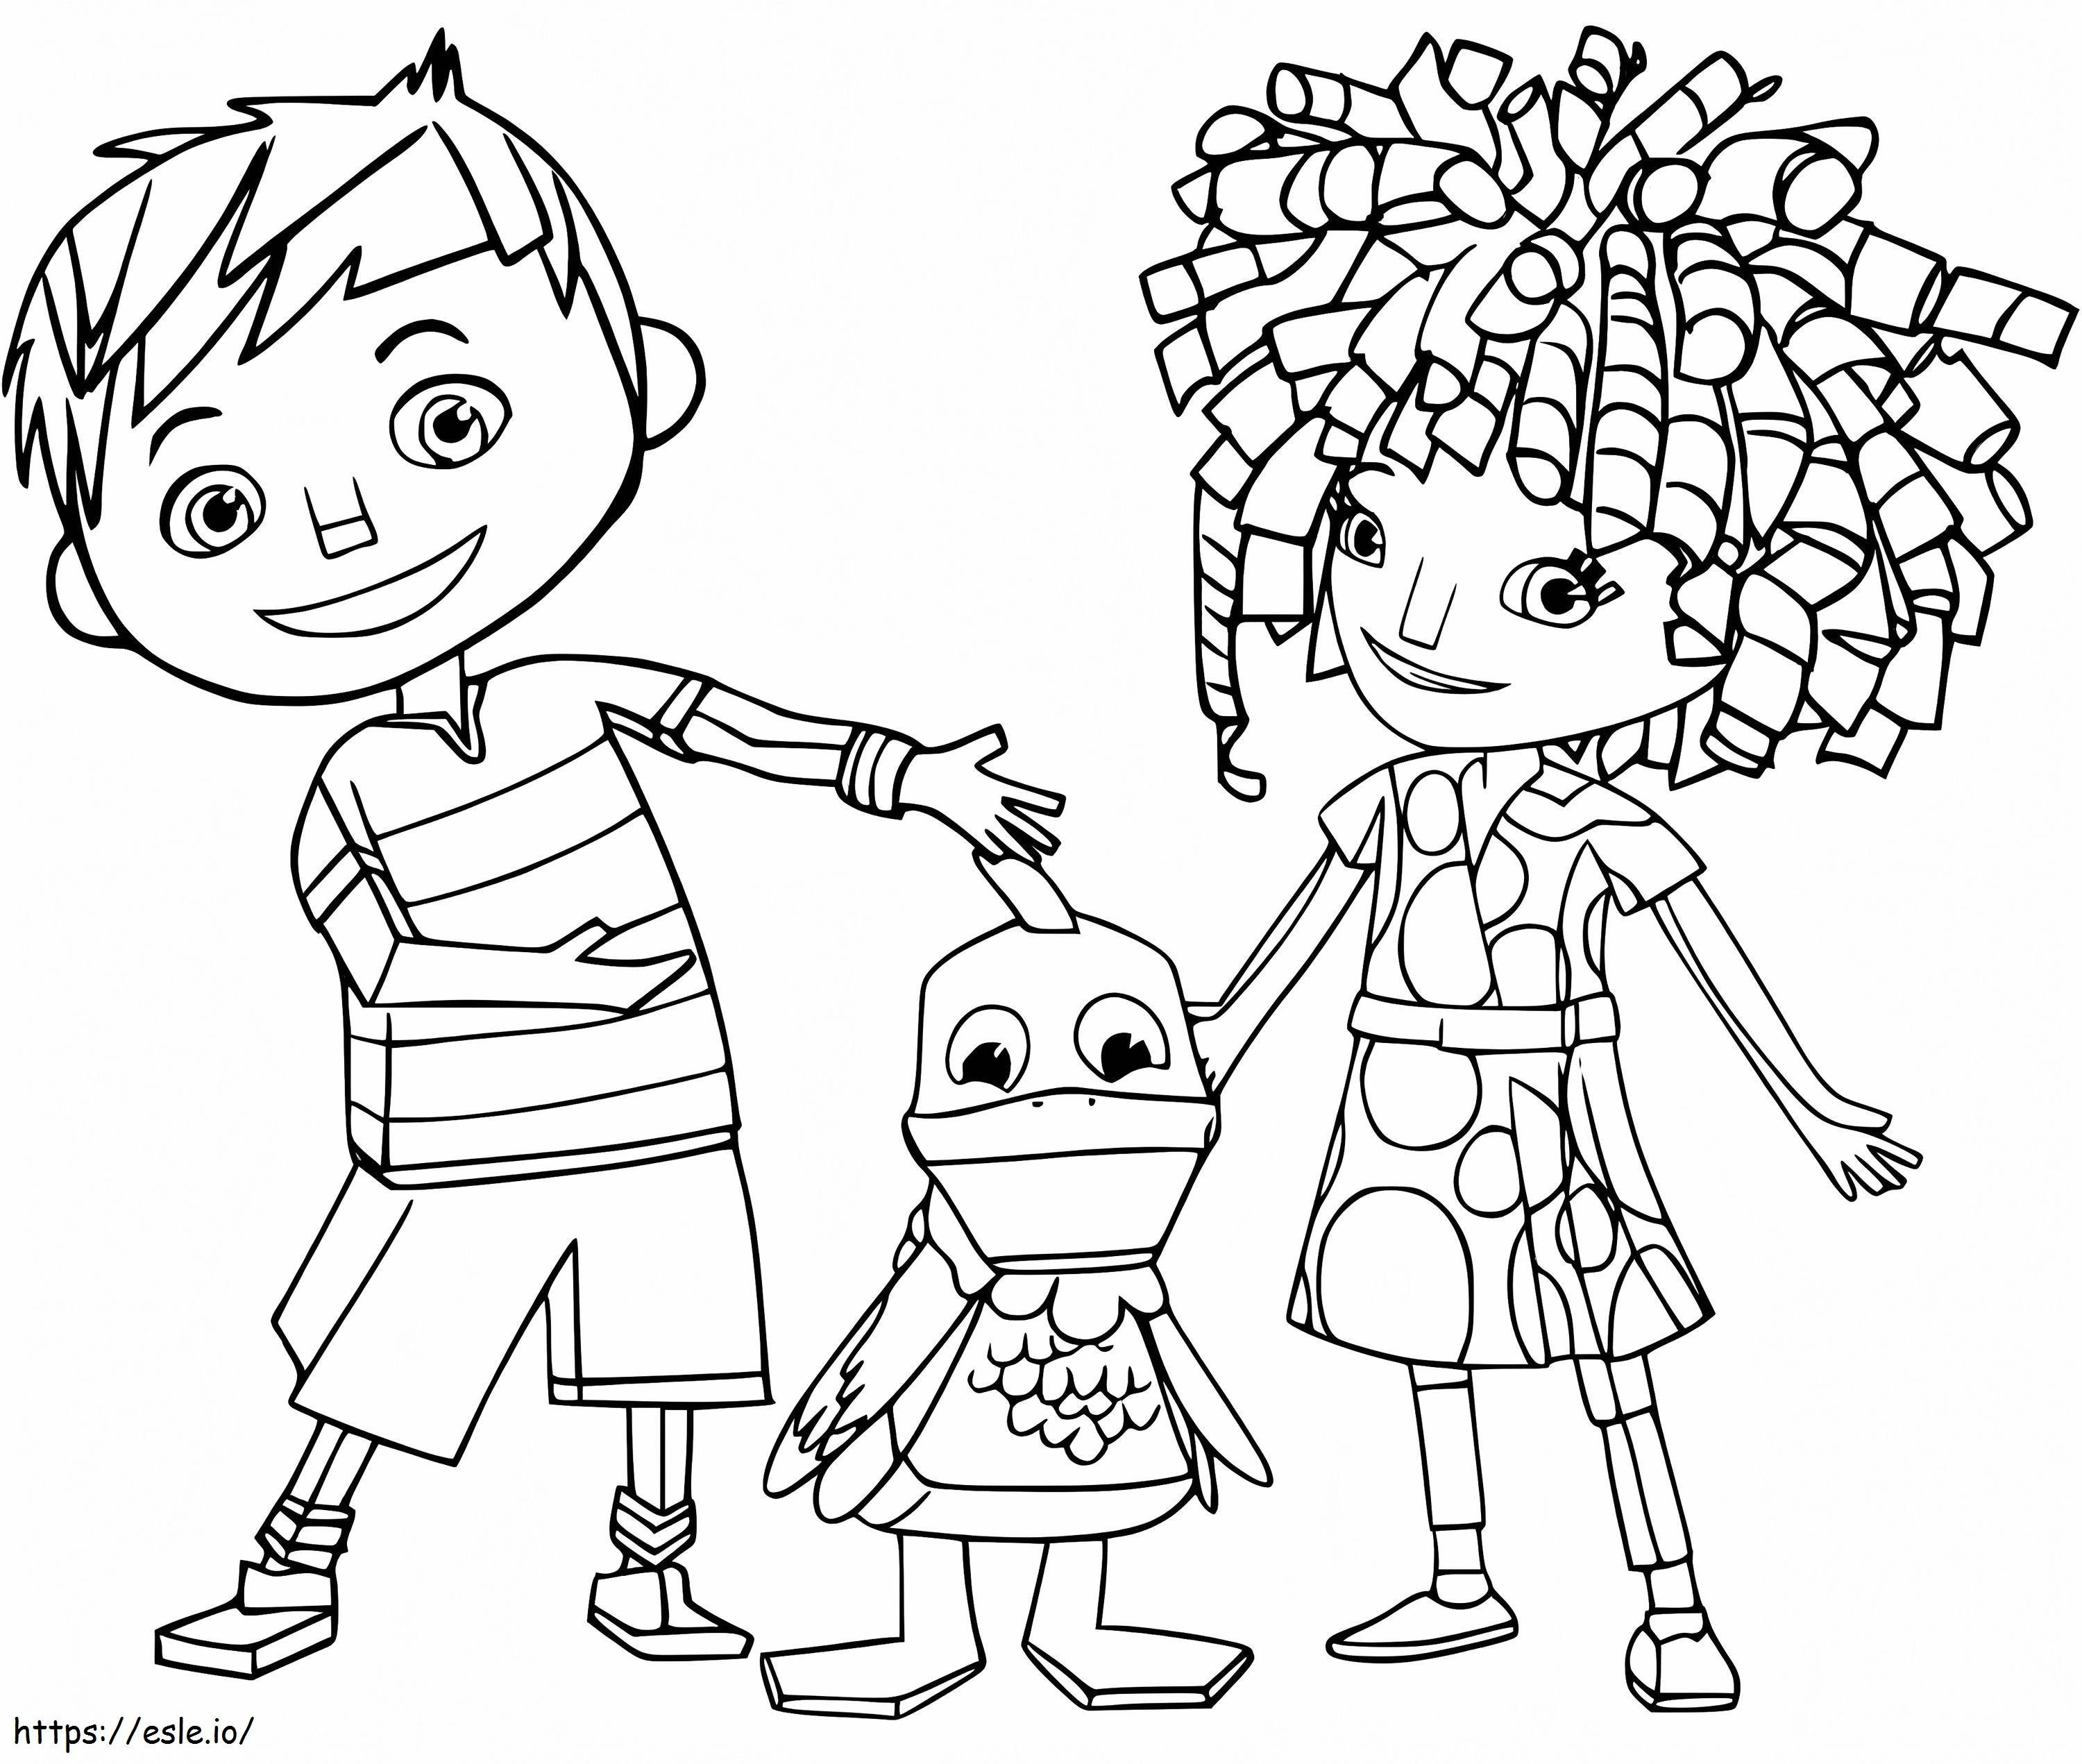 Zack And Quack Characters coloring page